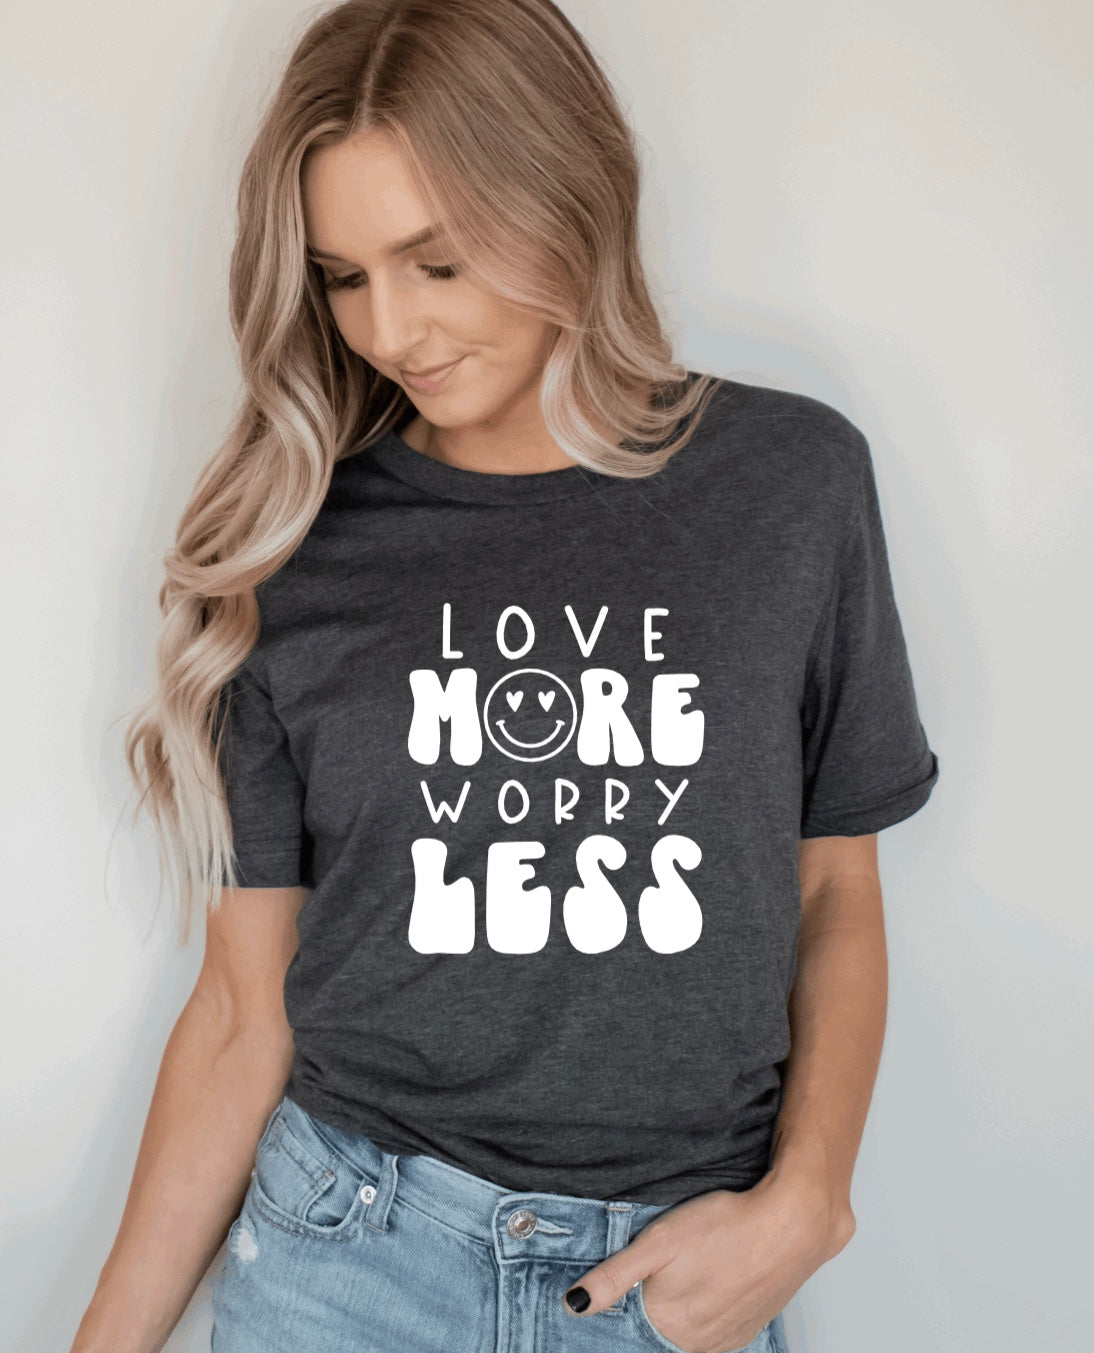 Love more worry less t-shirt 